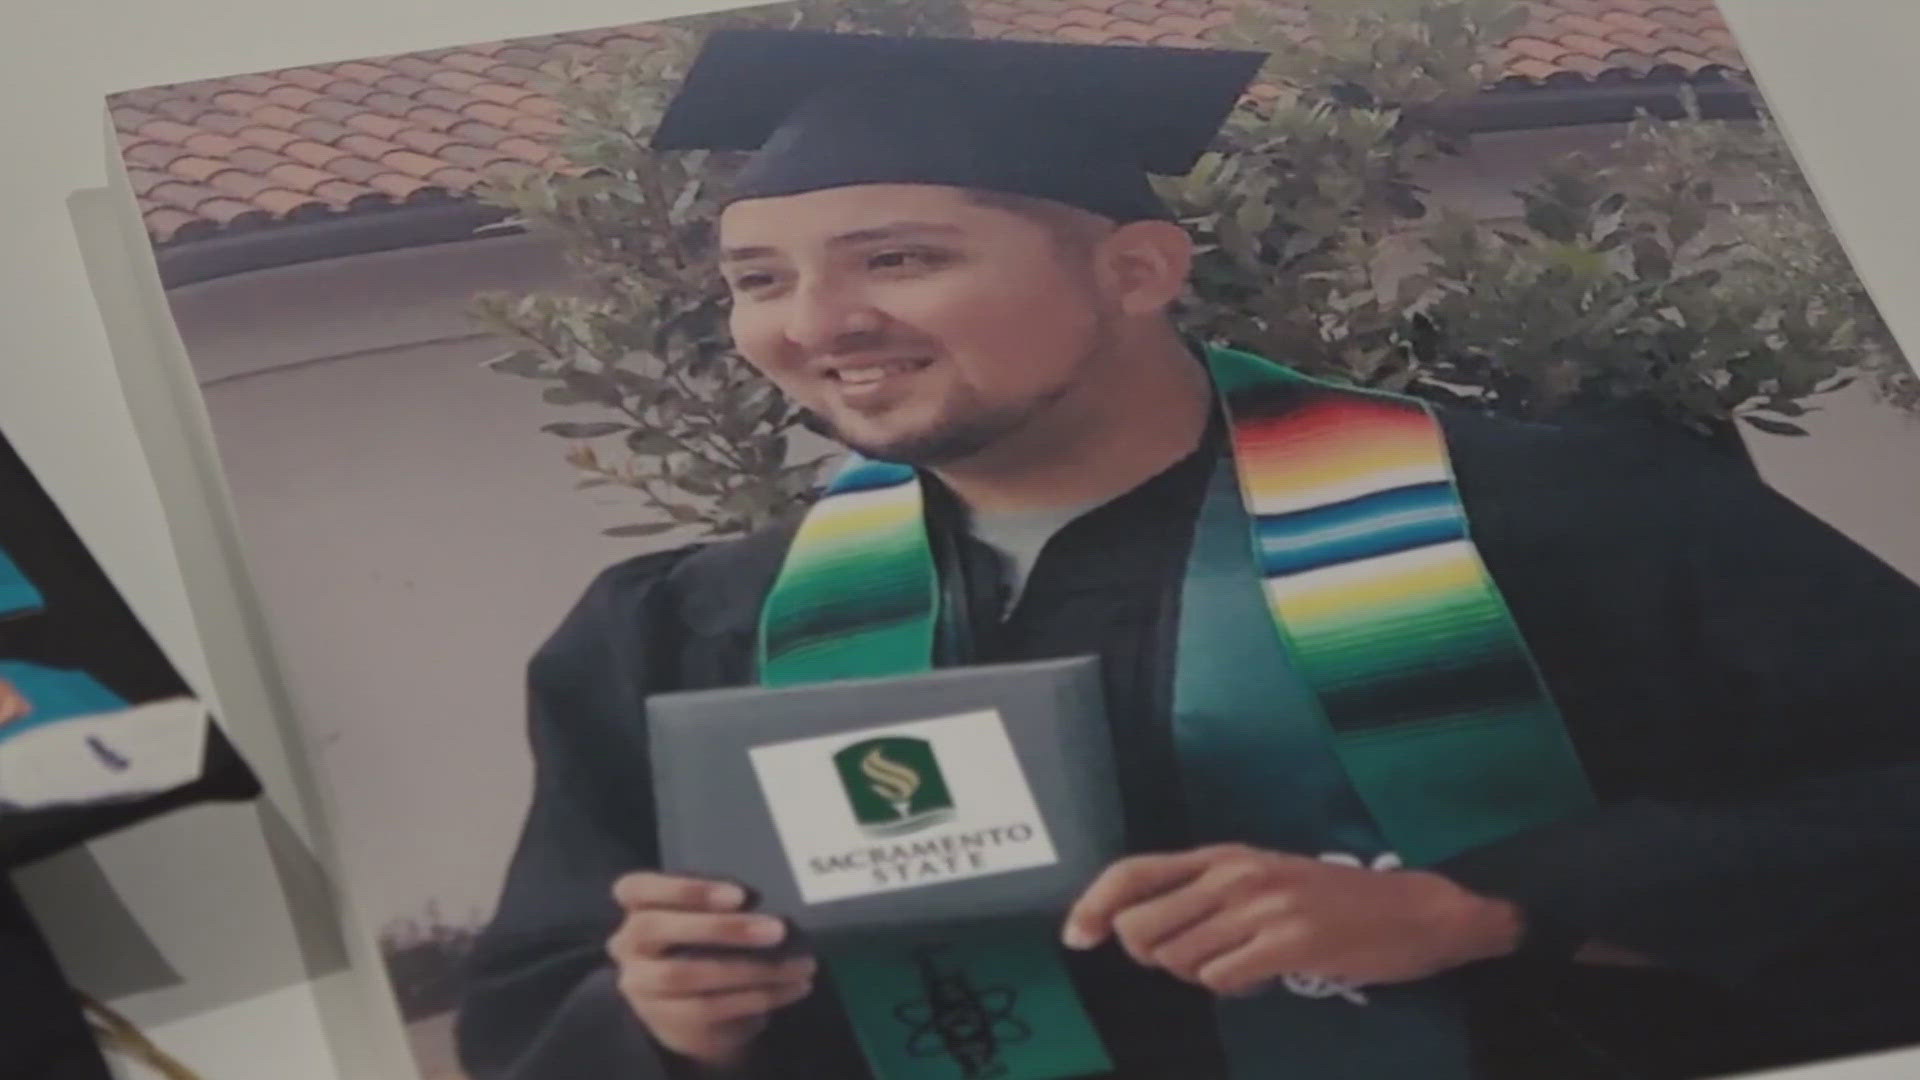 Janet Florez accepted a Posthumous degree for her 34-year-old son Gregorio who died due to a medical condition while watching a Sacramento Kings game last year.